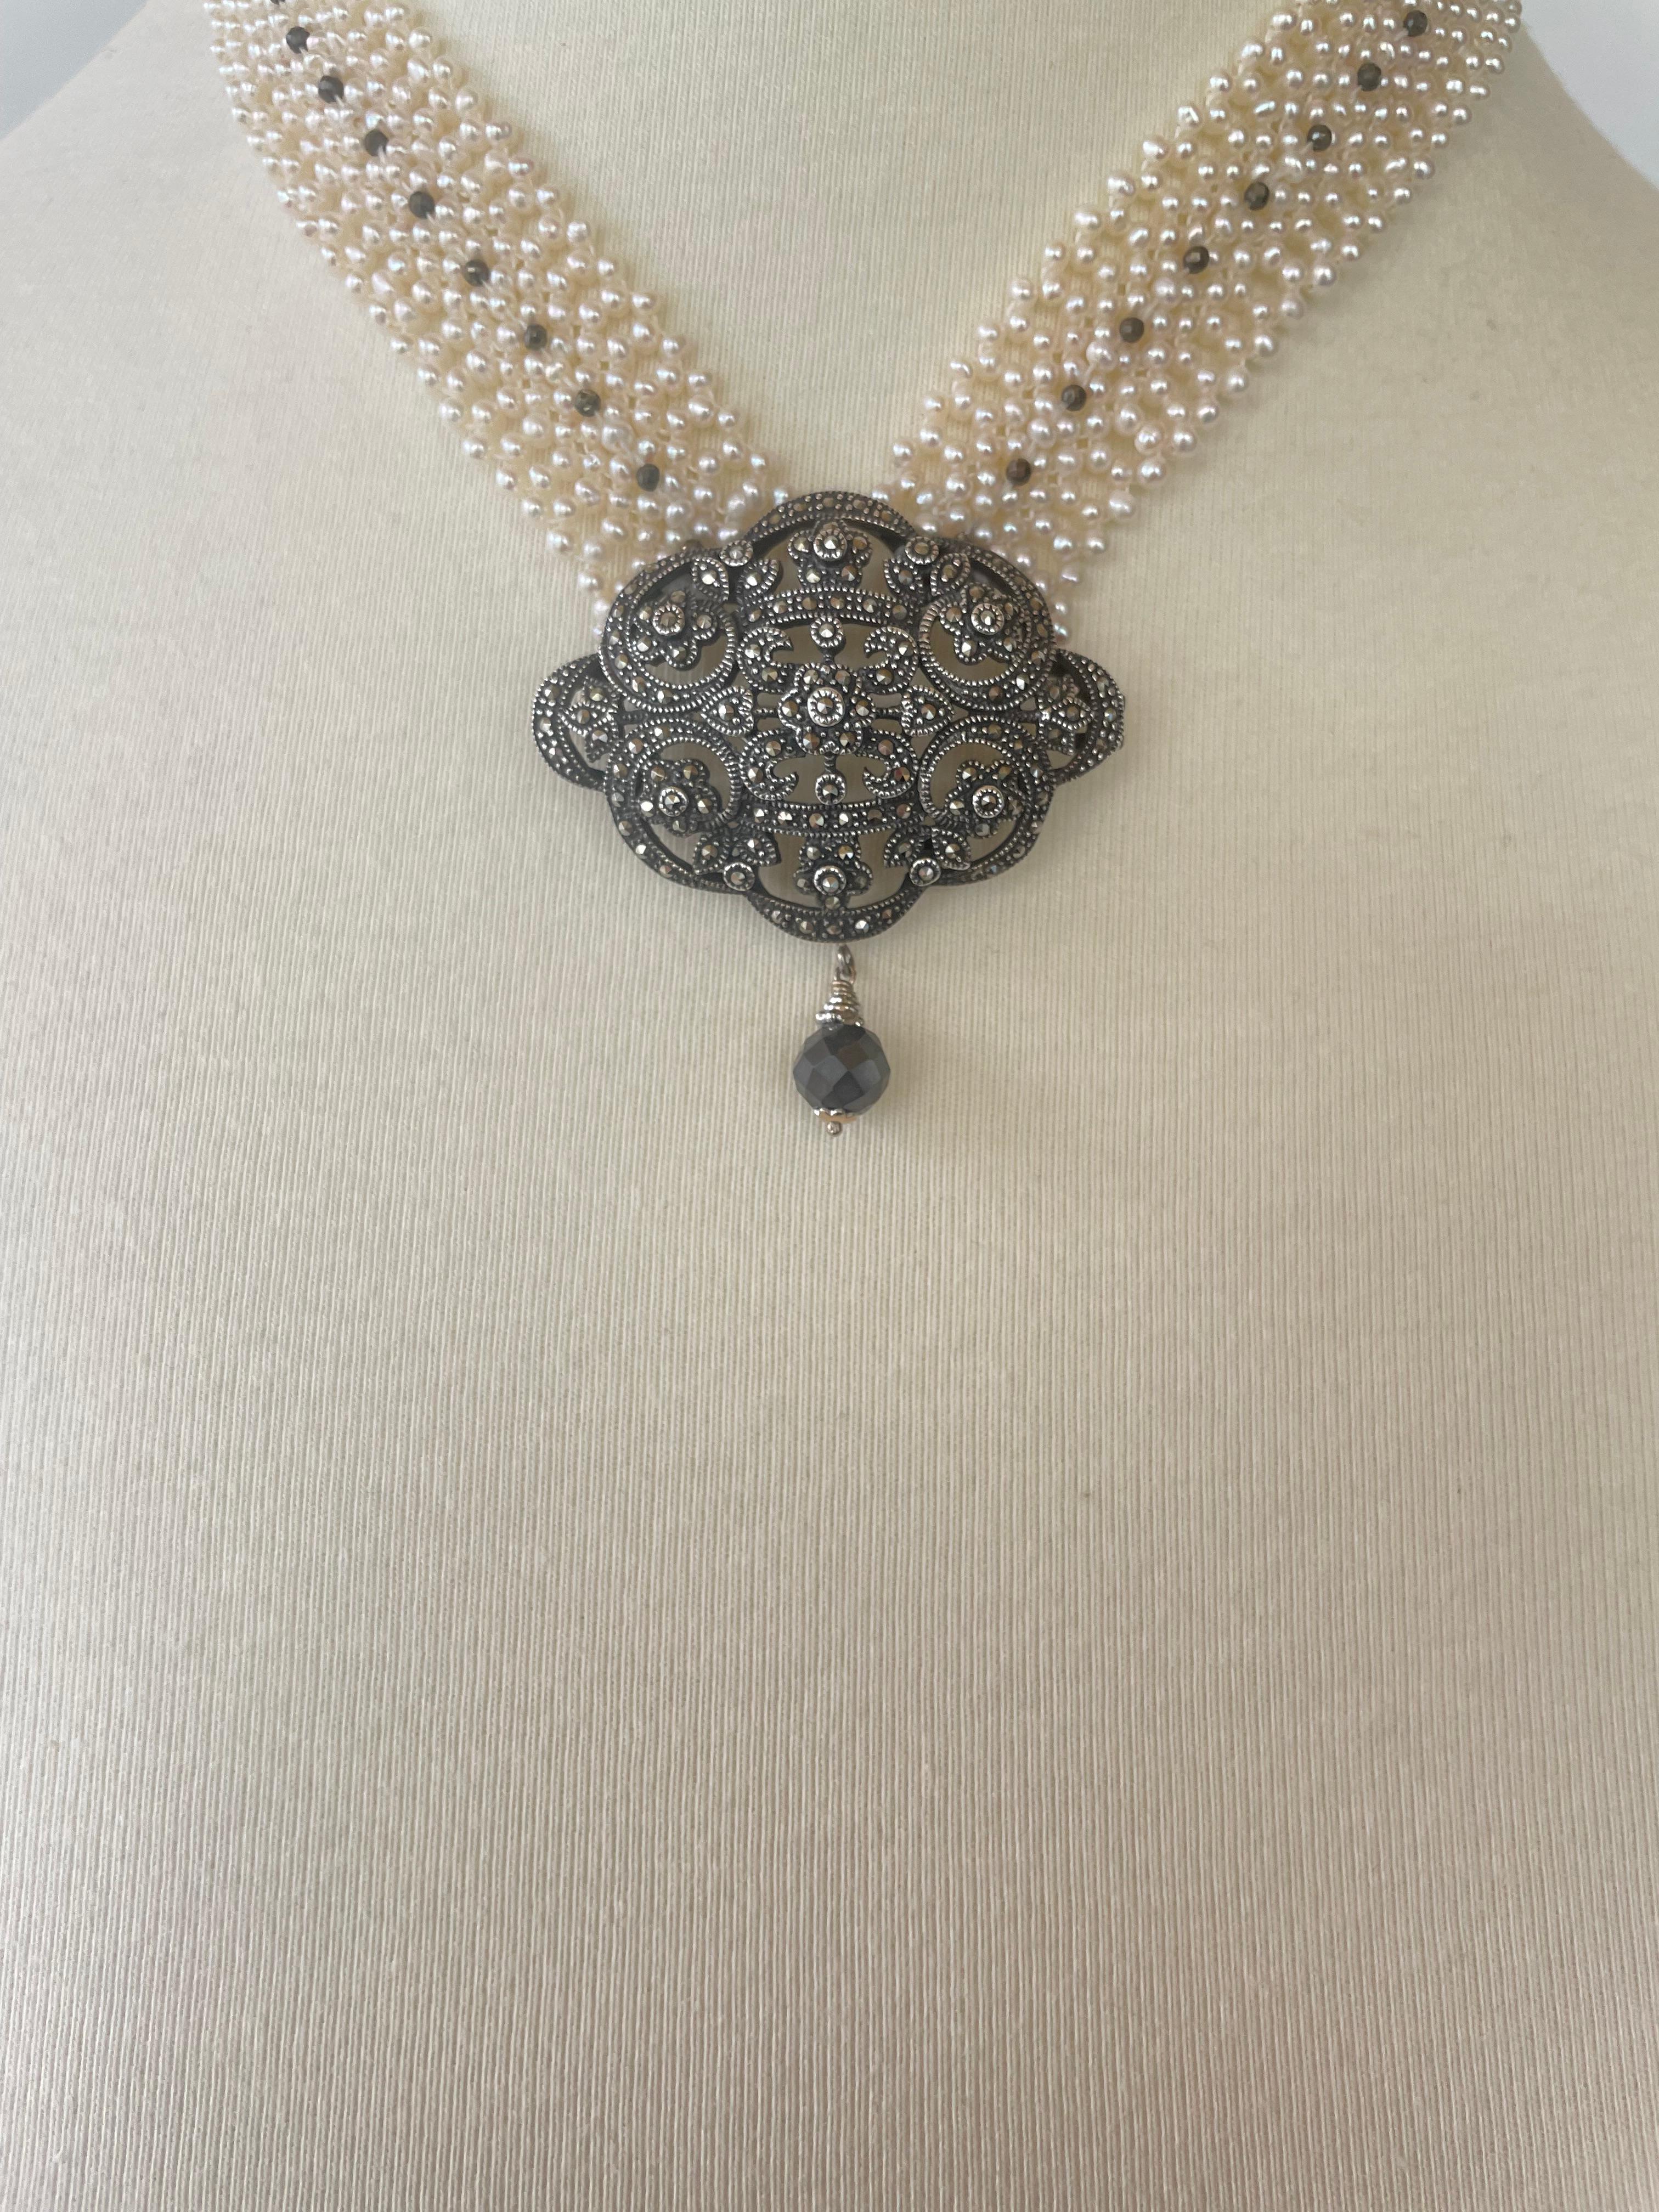 Marina J. Woven Pearl Necklace with Vintage Silver Centerpiece and Black Spinnel For Sale 2